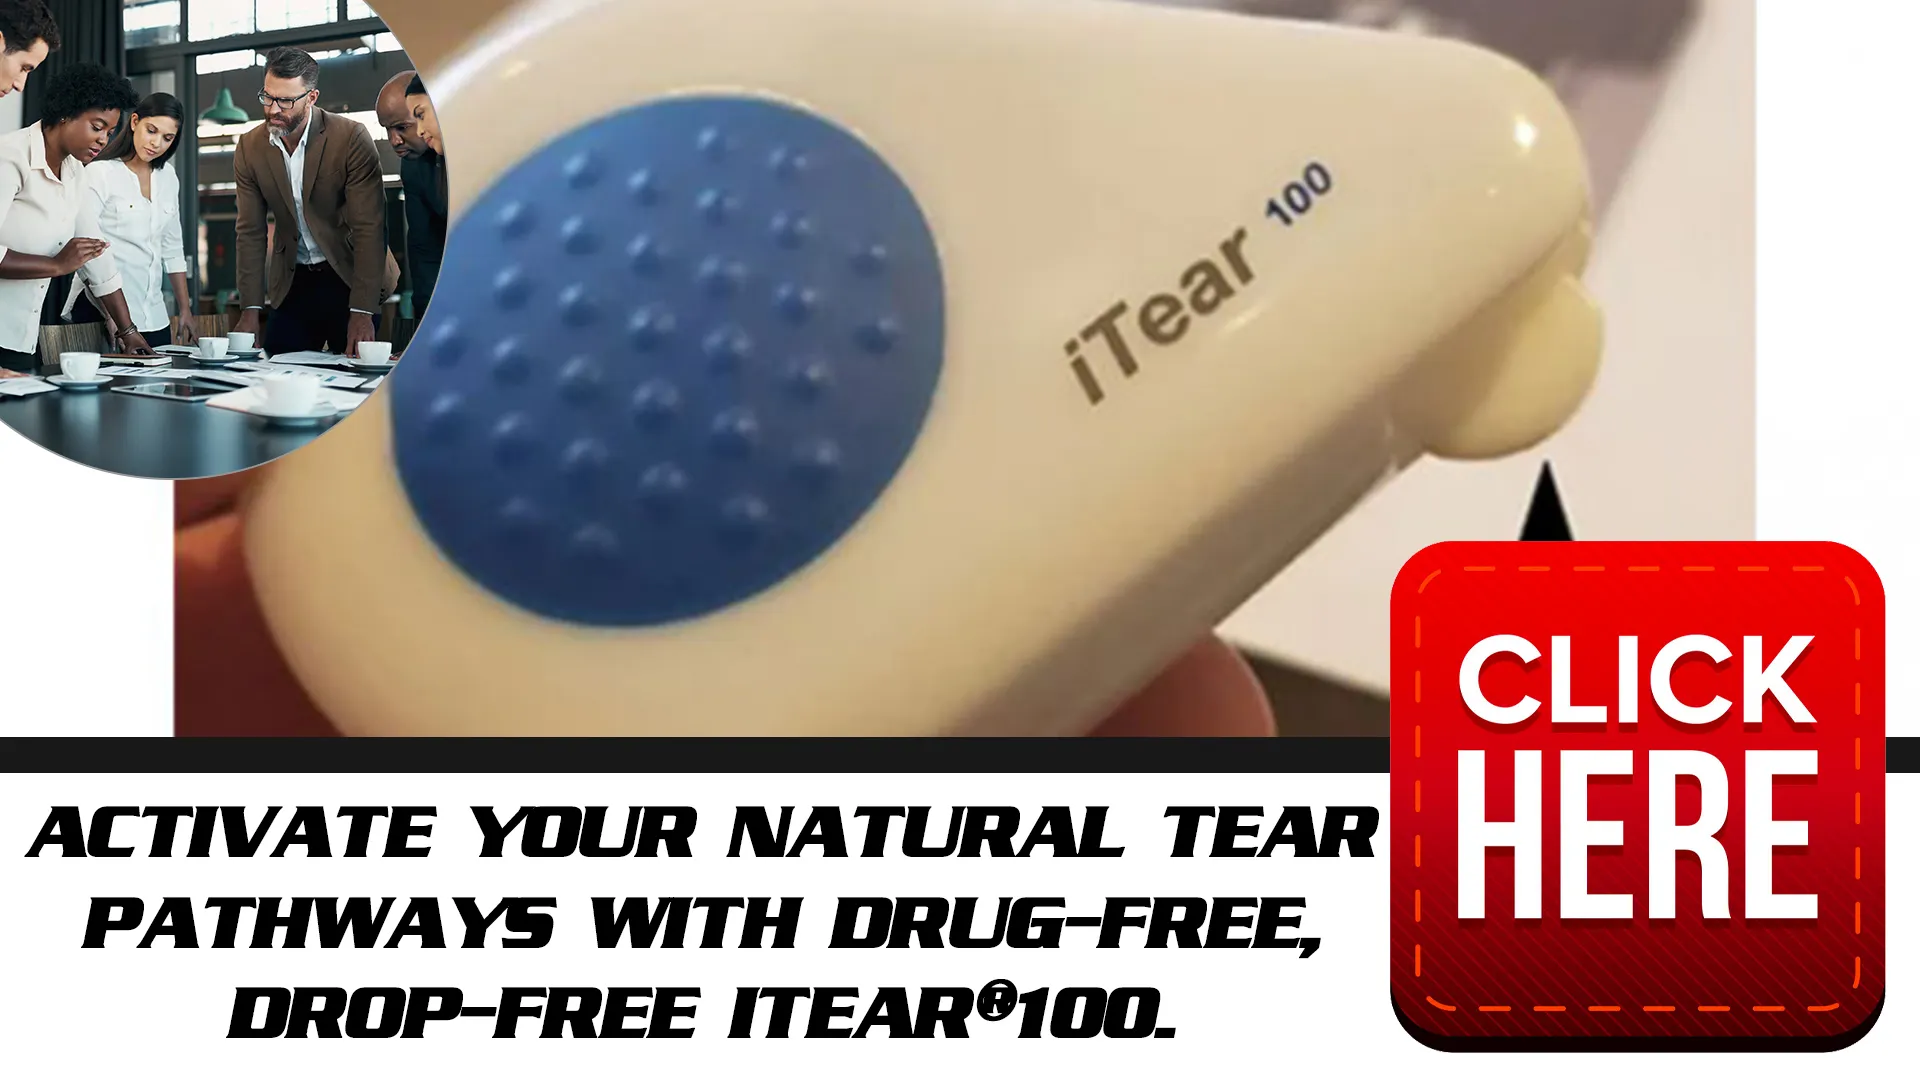 Why You Should Opt for the iTEAR100 Over Other Dry Eye Remedies